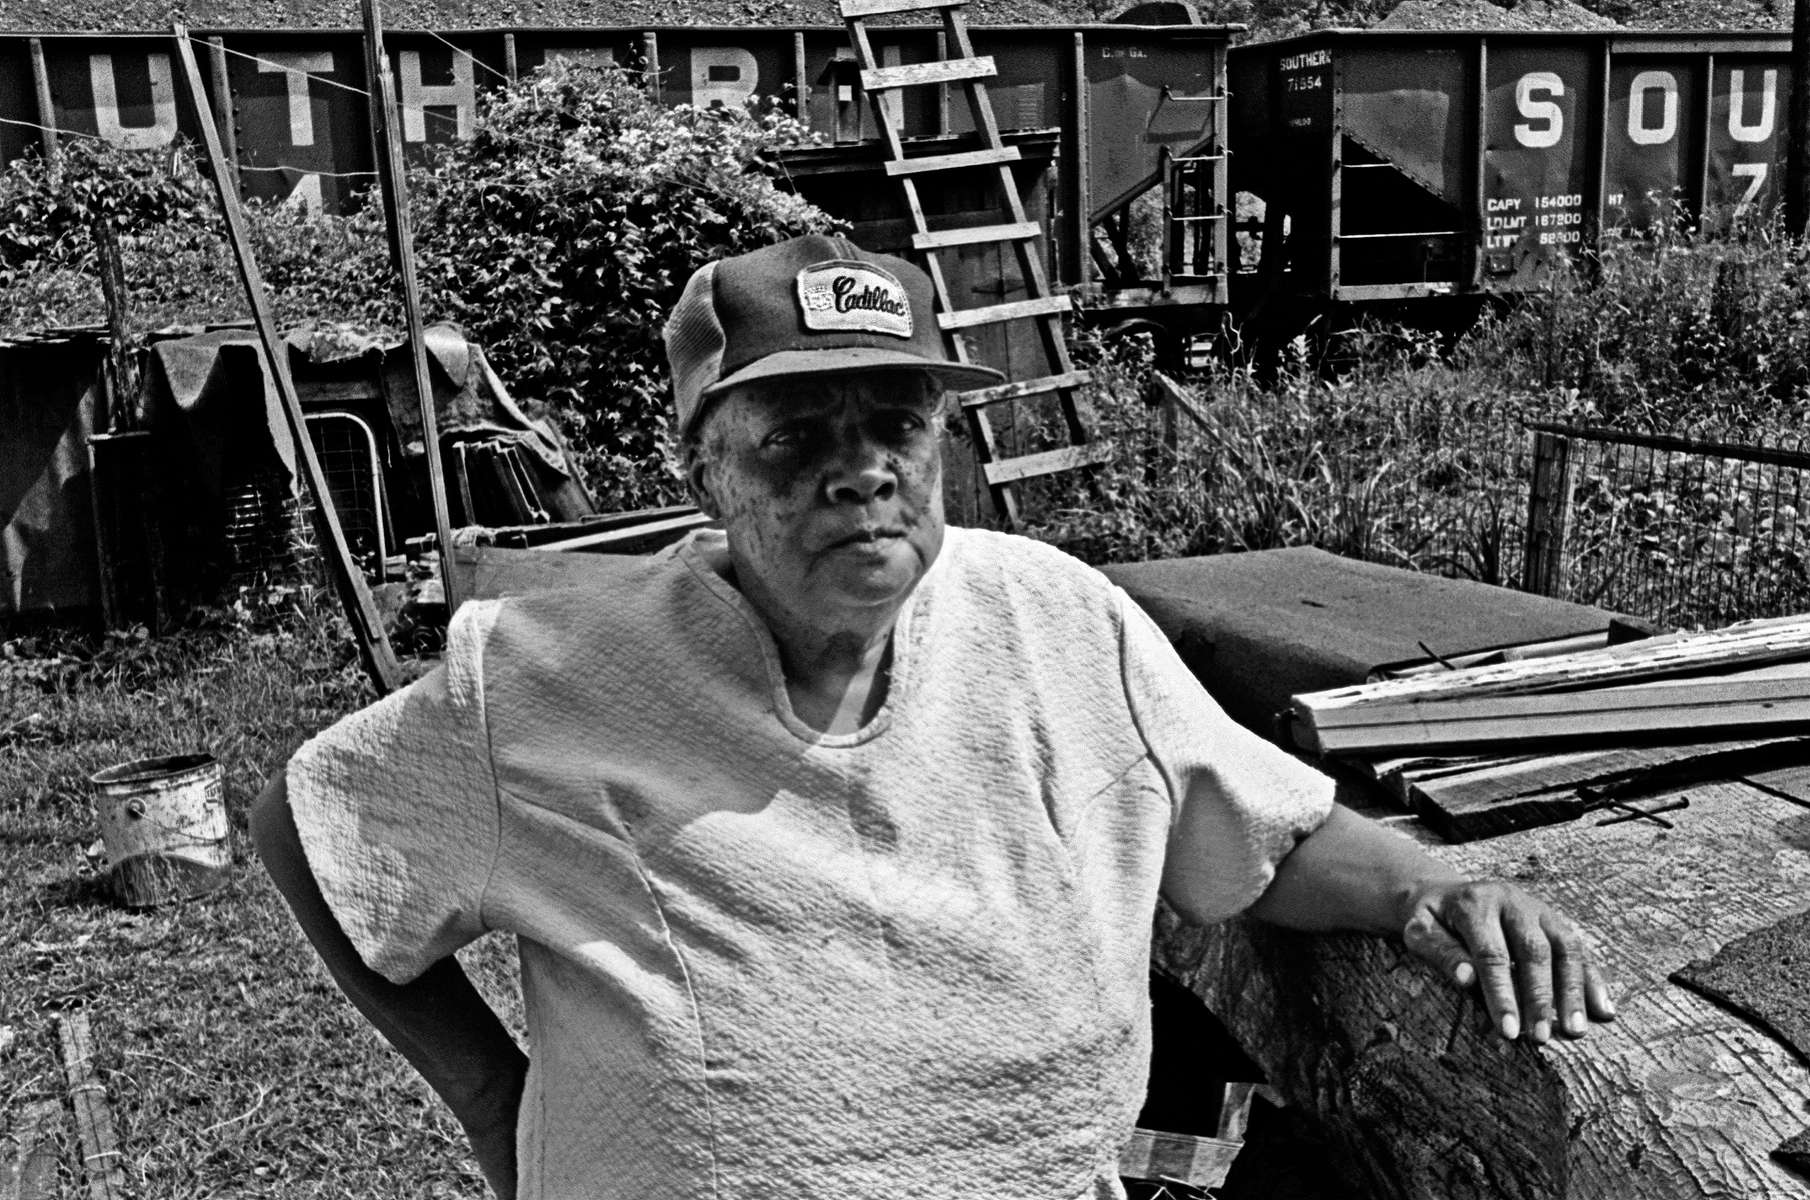 Woman with a Cadillac hat stands in her backyard, with a freight train parked on tracks behind. She lived in an all-Black hollow in the back hills of West Virginia. She posed willingly for me, but after few minutes her husband called her back into the house. She quickly told me, {quote}You'd better get moving. My husband says he's getting his gun right now.{quote} People don't take kindly to strangers, and no stranger has any reason to visit this small, isolated settlement, unless they are a federal agent or a drug dealer. Jon Chase photo 